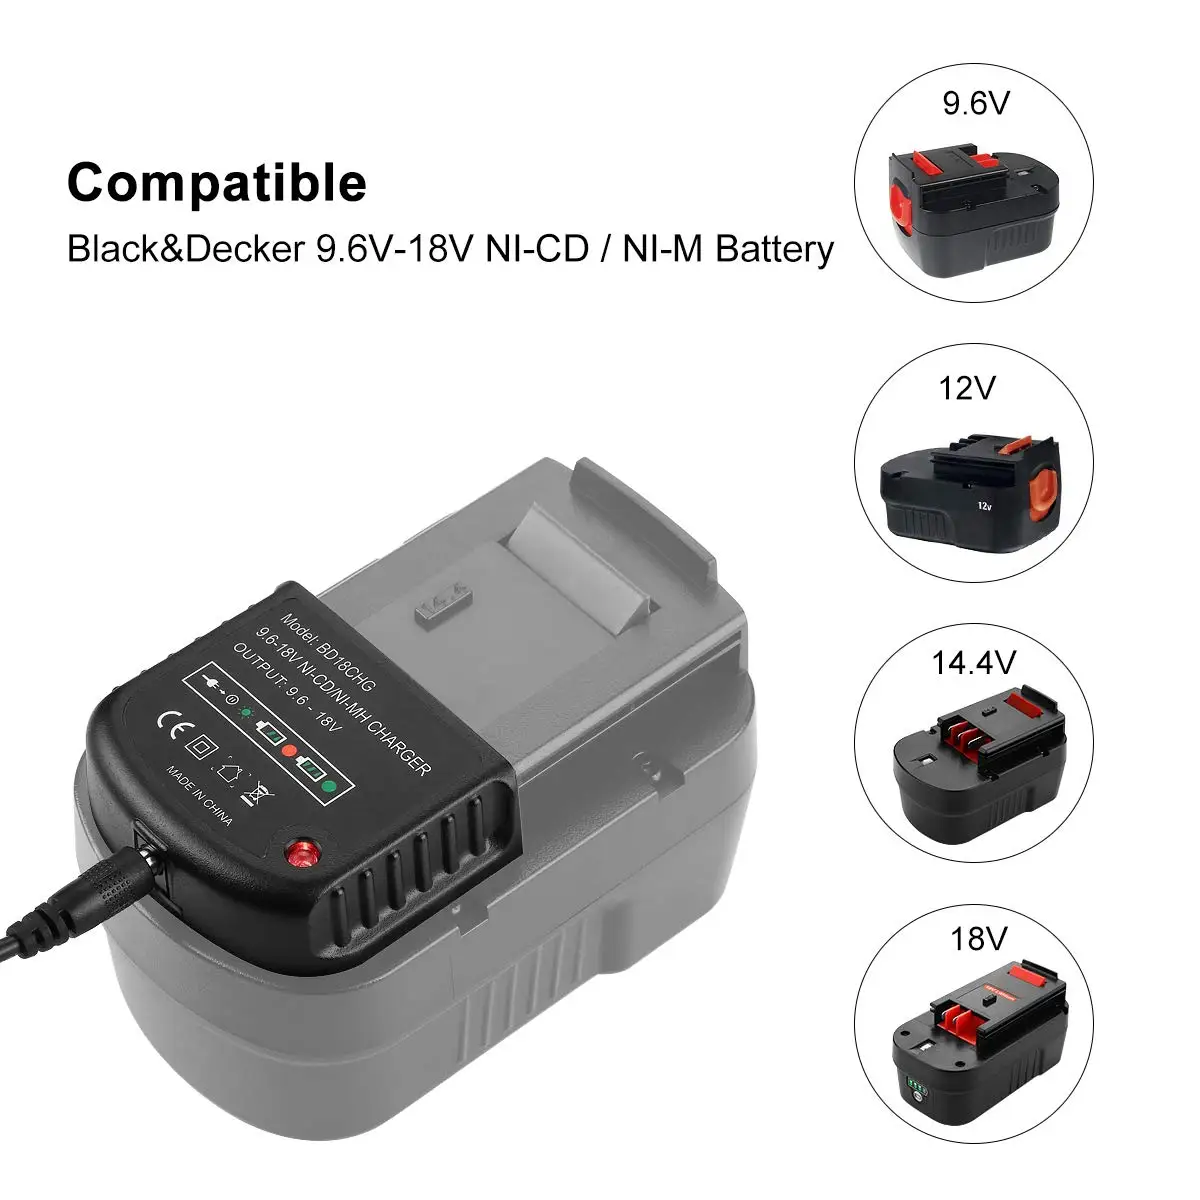 Suitable For Ni-cd&ni-mh Battery Charger 9.6v/12v/14.4v/18v For  Black&decker Fast Battery Charger Fsb18 Fs120bx Newest - Chargers -  AliExpress